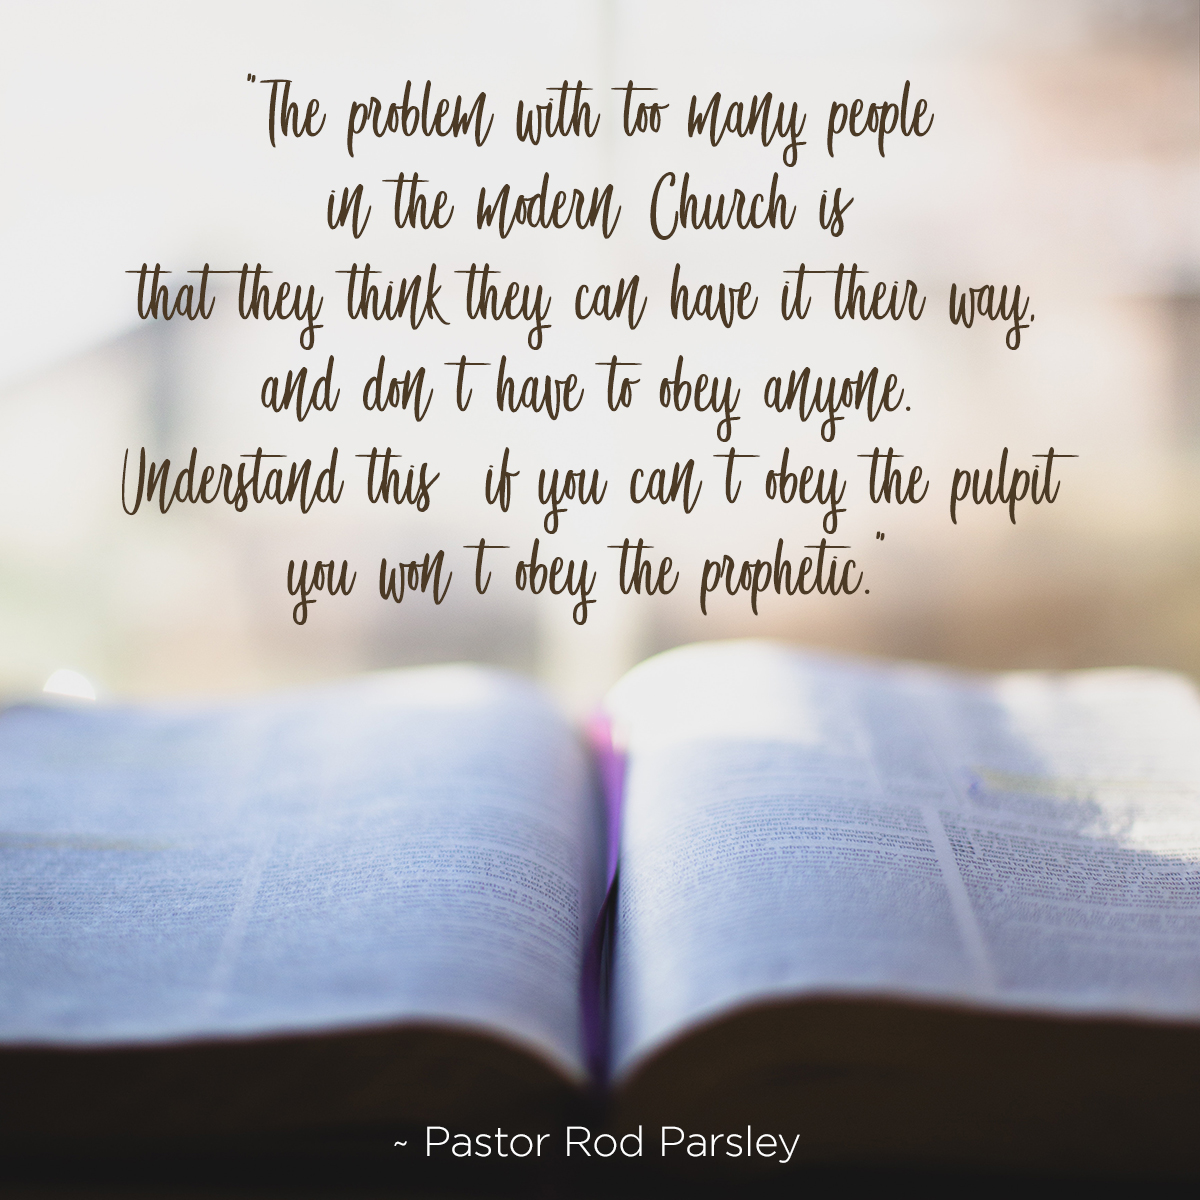 “The problem with too many people in the modern Church is that they think they can have it their way, and don’t have to obey anyone. Understand this: if you can’t obey the pulpit you won’t obey the prophetic!” – Pastor Rod Parsley